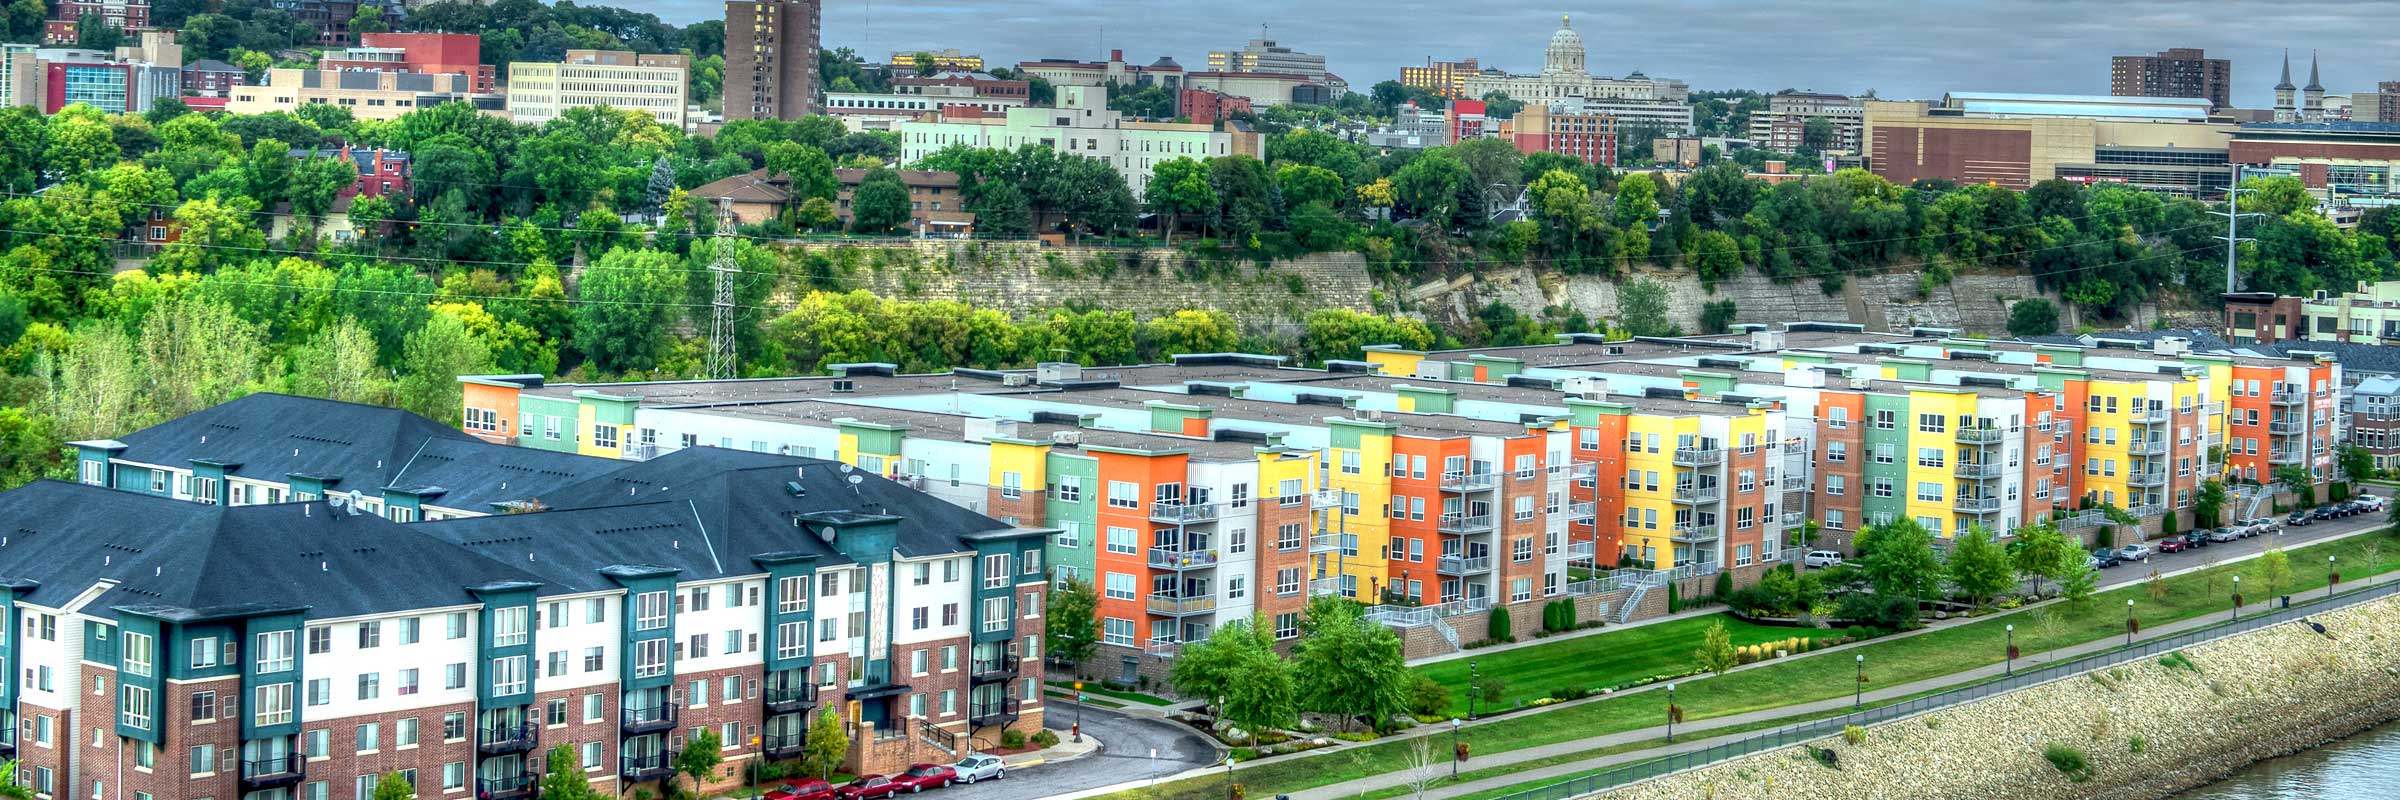 Apartment Units along the Mississippi River in St. Paul, MN